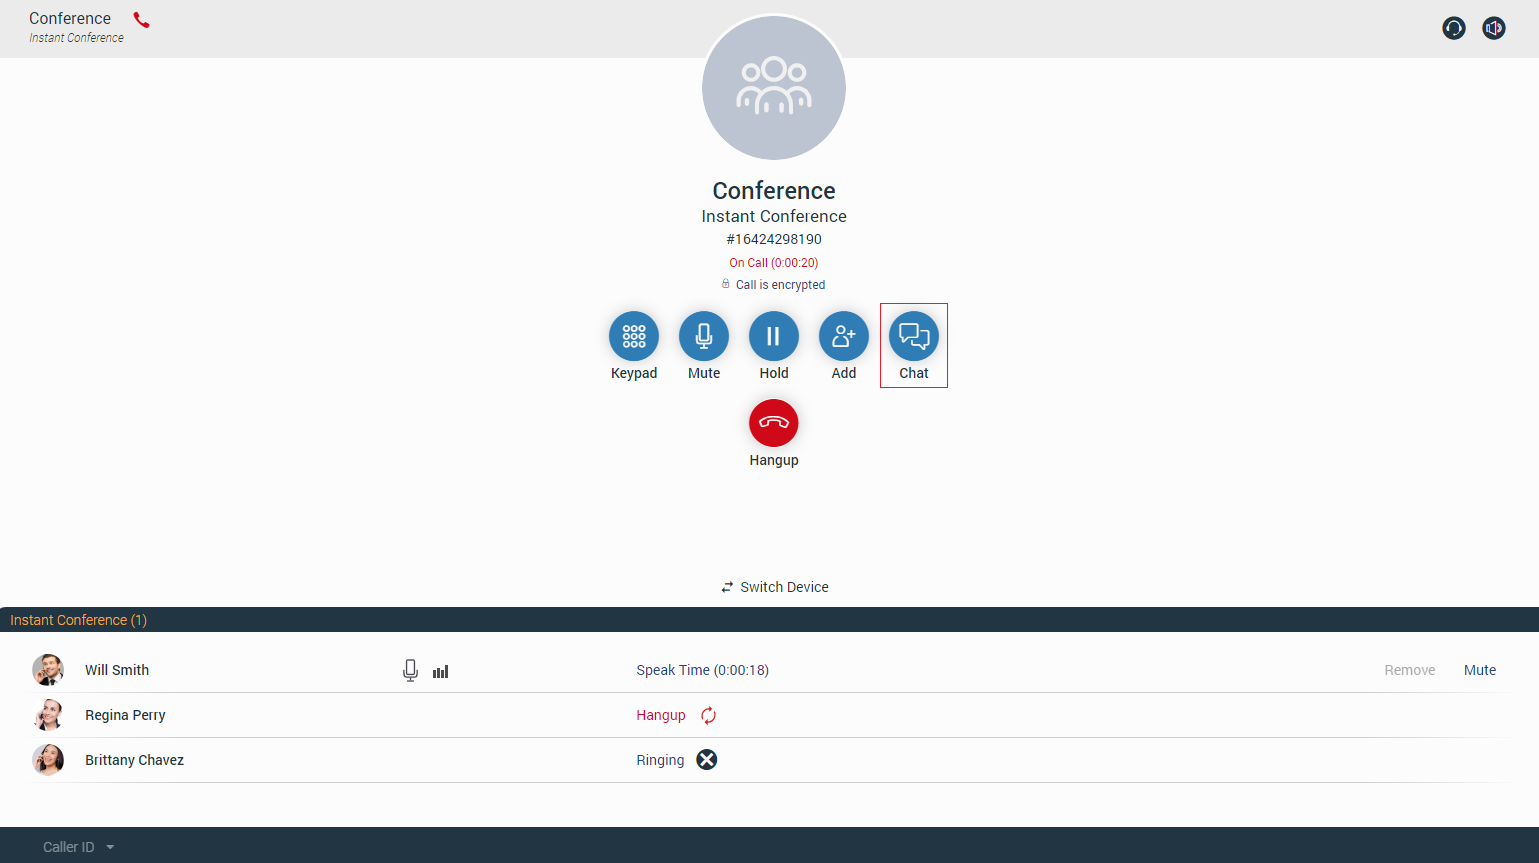 Start a Chat Conversation from a Live Conference Call